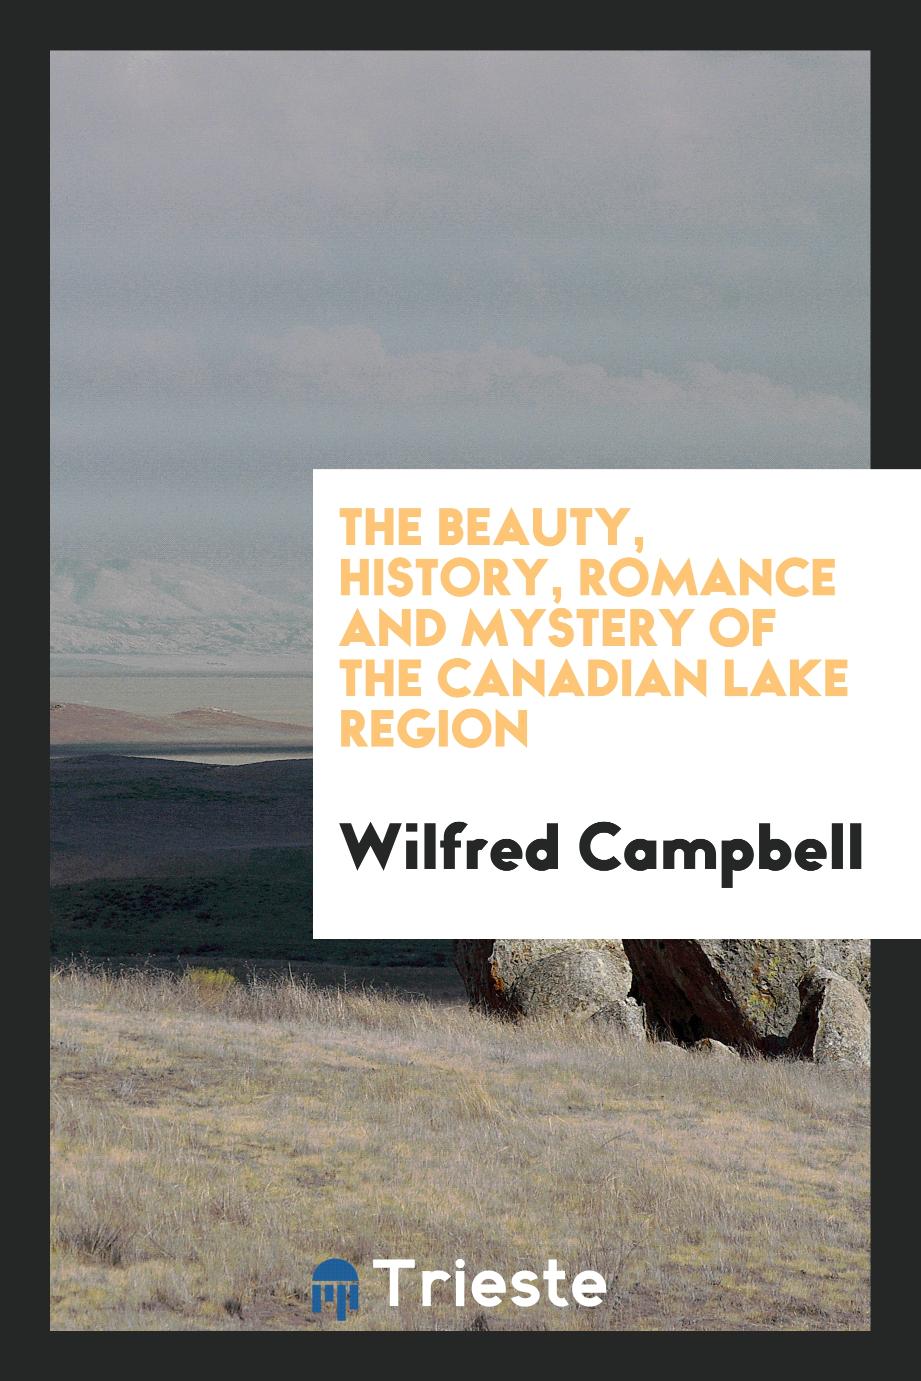 The Beauty, History, Romance and Mystery of the Canadian Lake Region